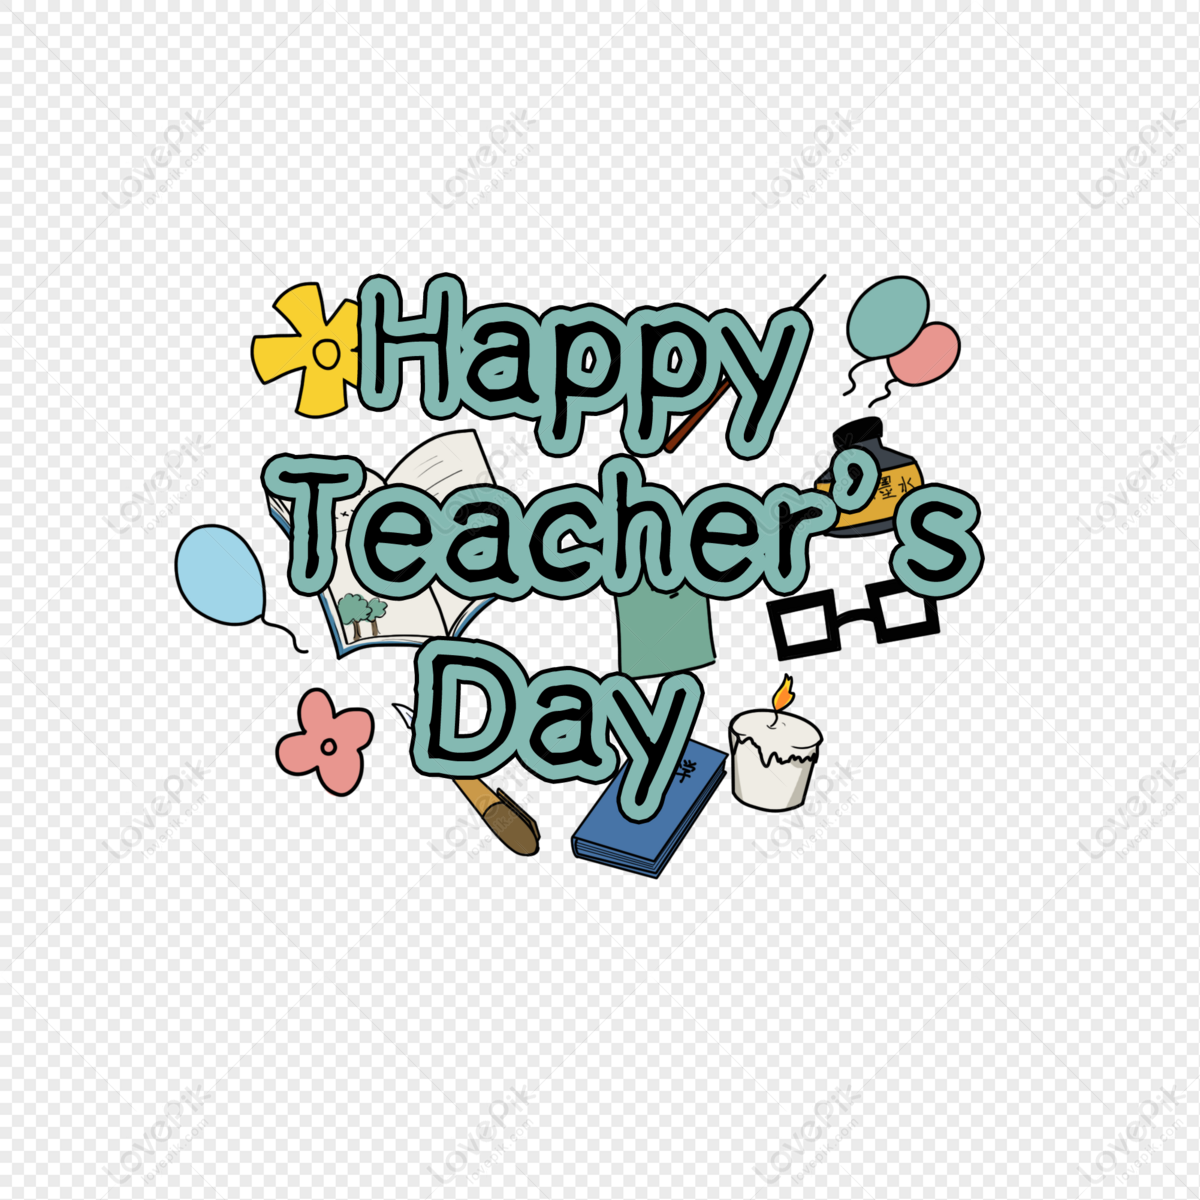 Happy Teacher Day Template Design - Photo #1249 - PngFile.net | Free PNG  Images Download